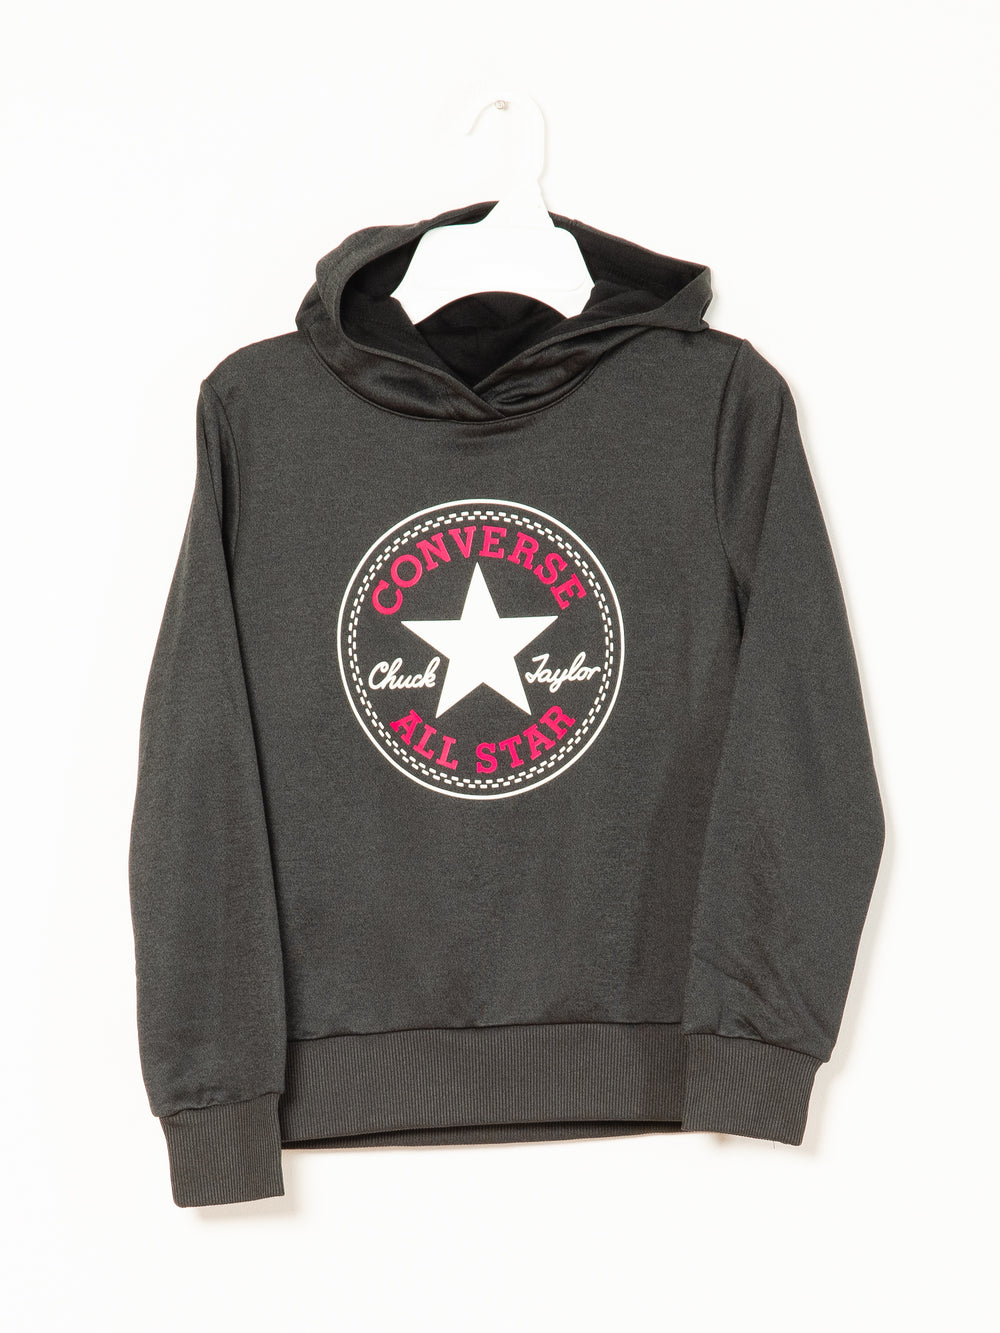 CONVERSE YOUTH GIRLS SOLAR HOODIE  - CLEARANCE